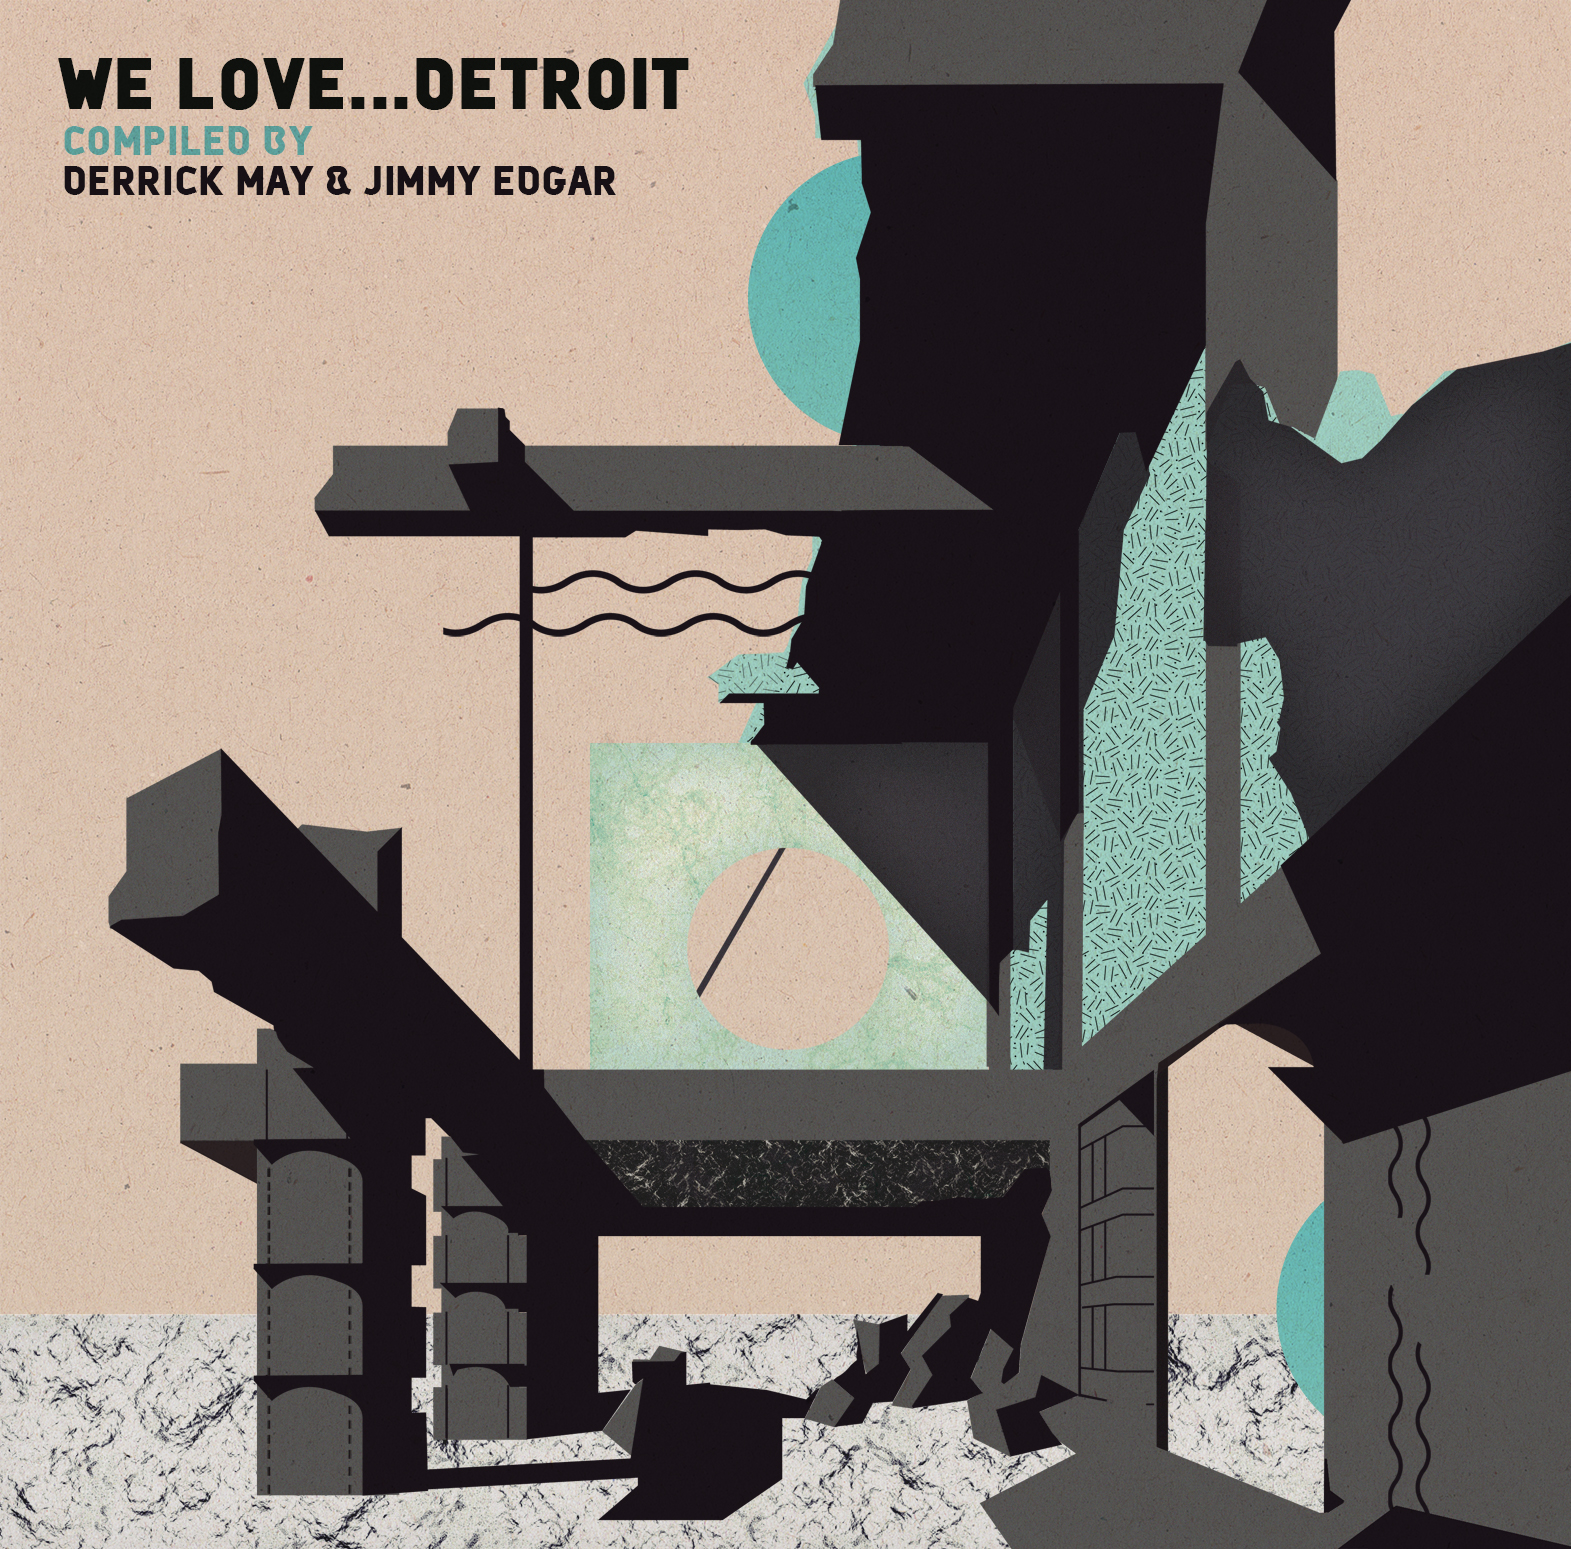 We Love Detroit - Compiled By Derrick May & Jimmy Edgar